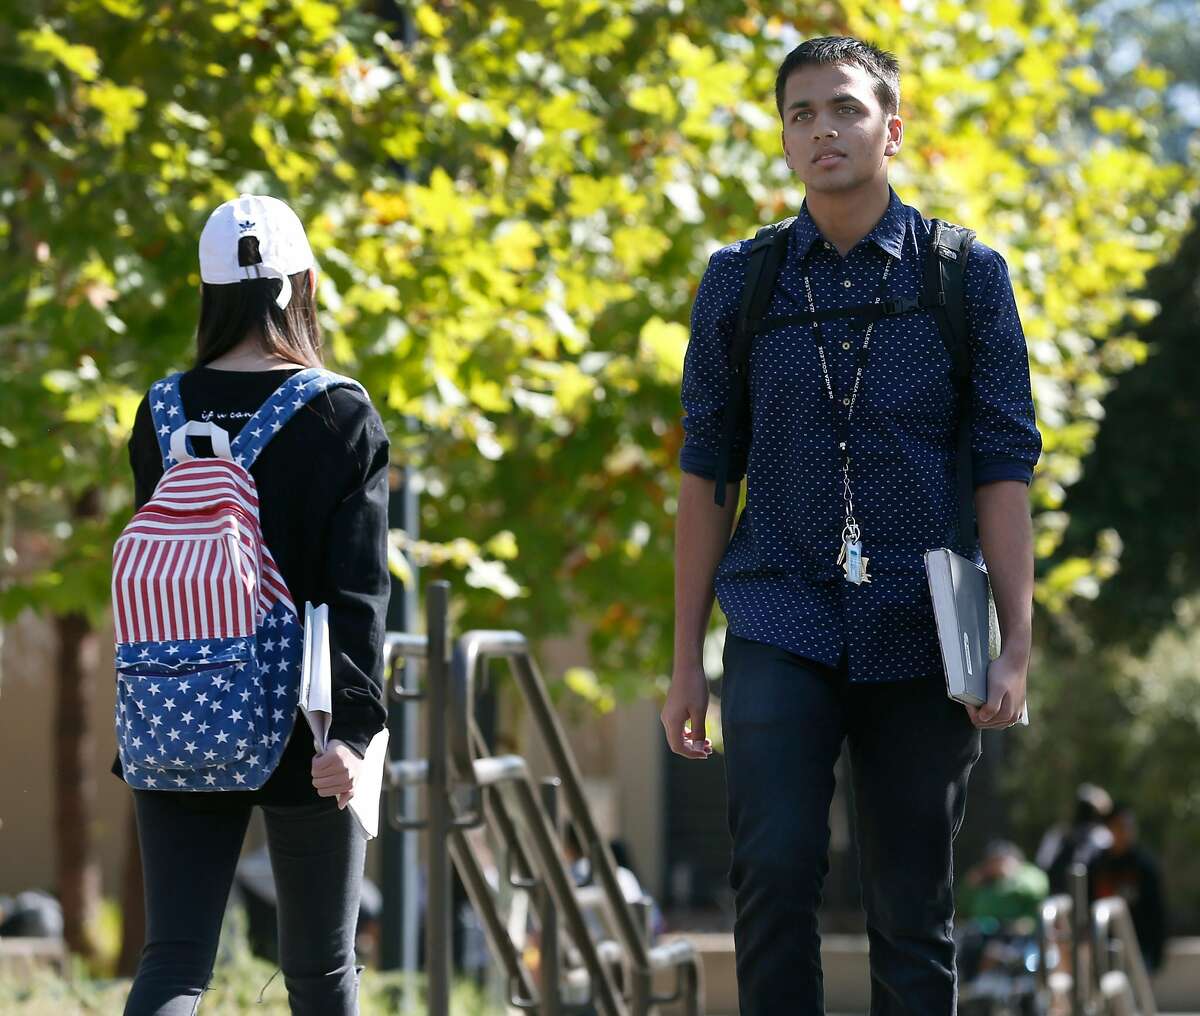 Neeraj Dharmadhikari, a computer science major, walks to his next class at De Anza College in Cupertino, Calif. on Tuesday, Oct. 3, 2017.